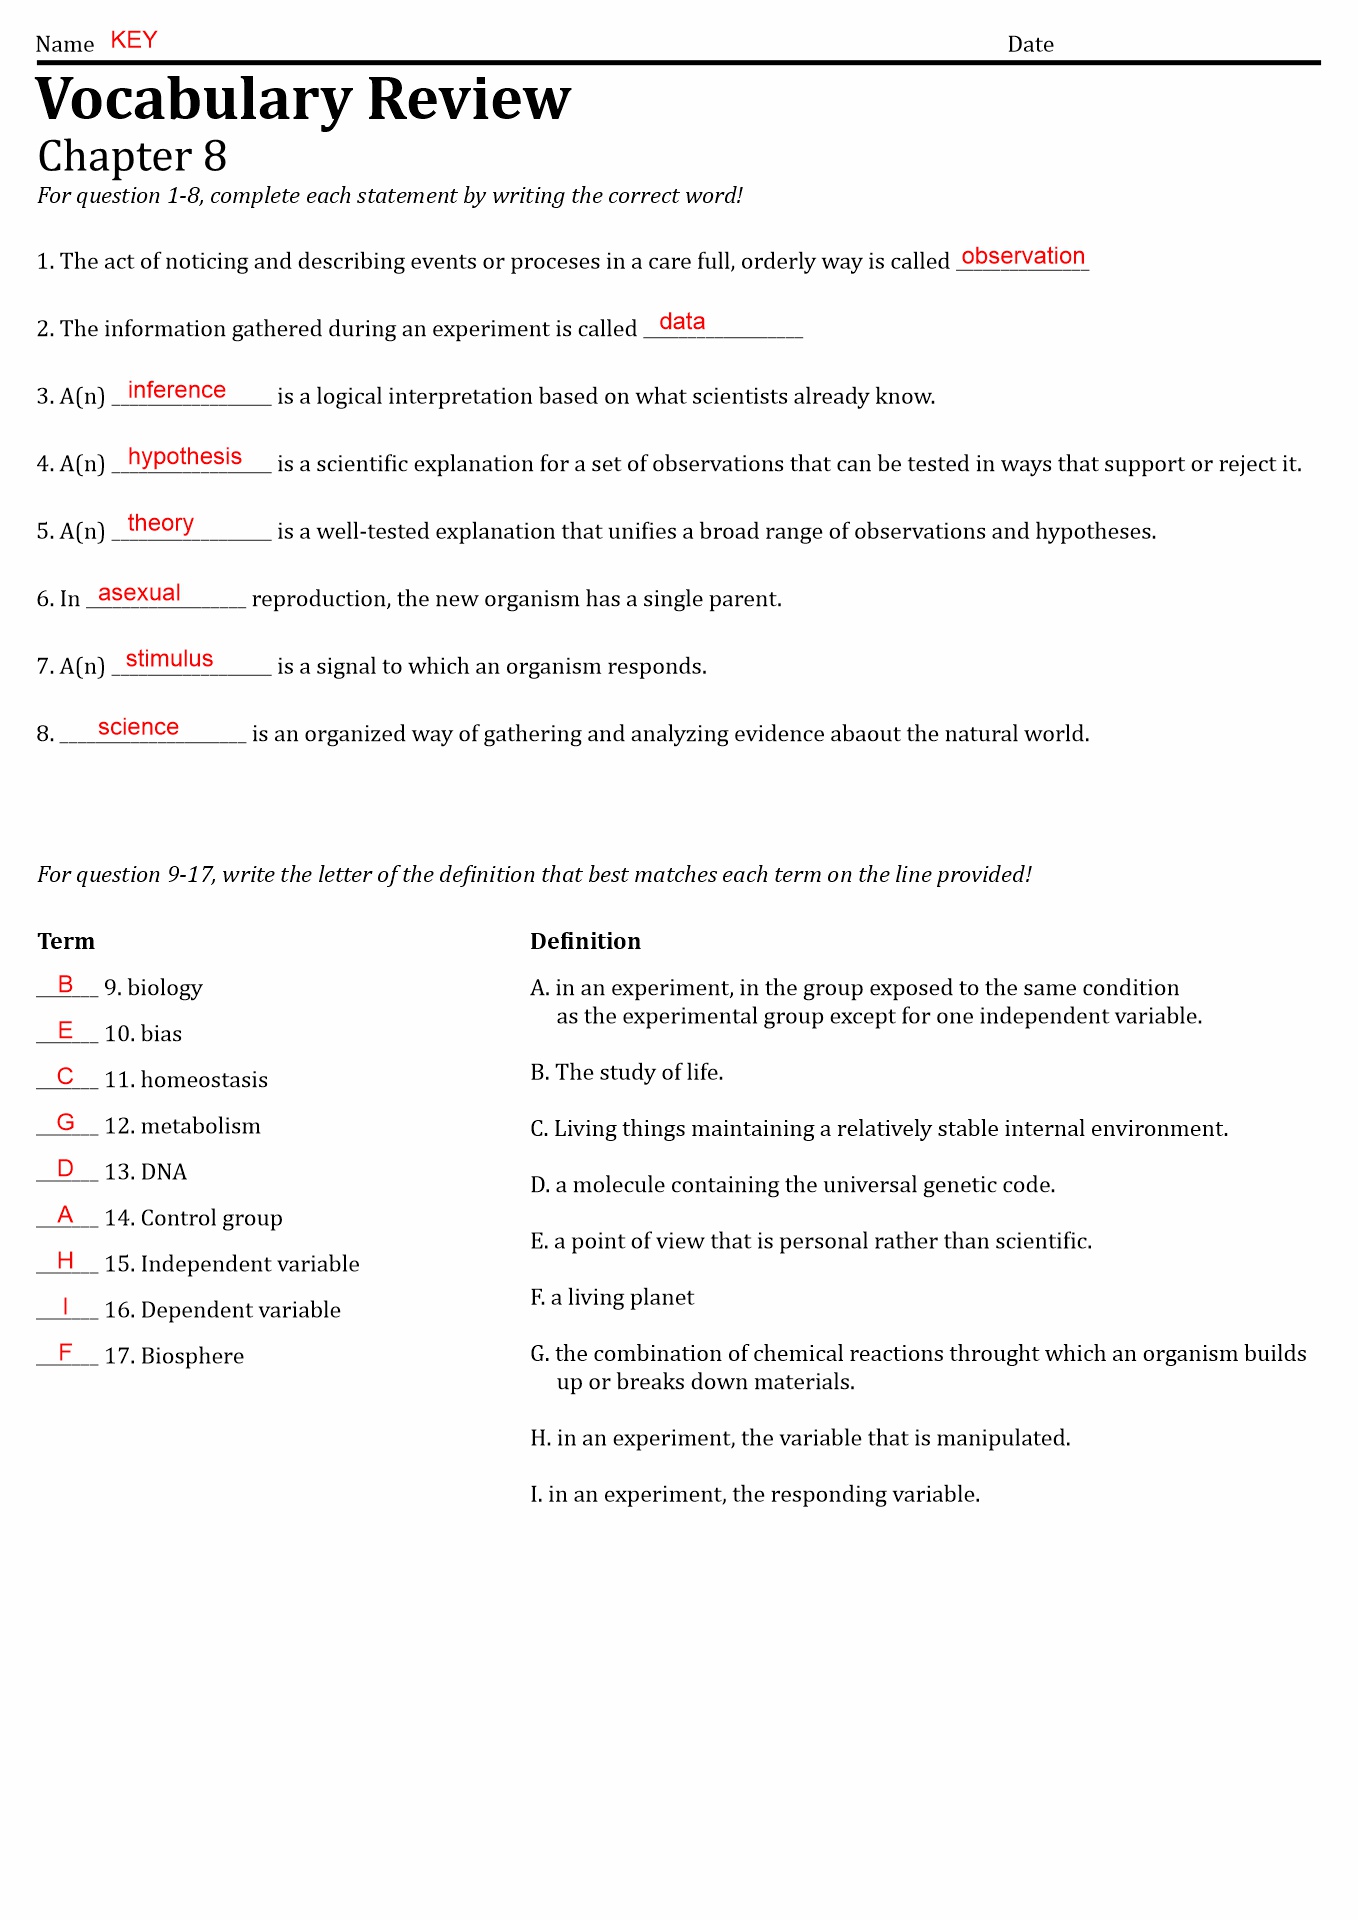 Biology Chapter 8 Vocabulary Review Answer Key